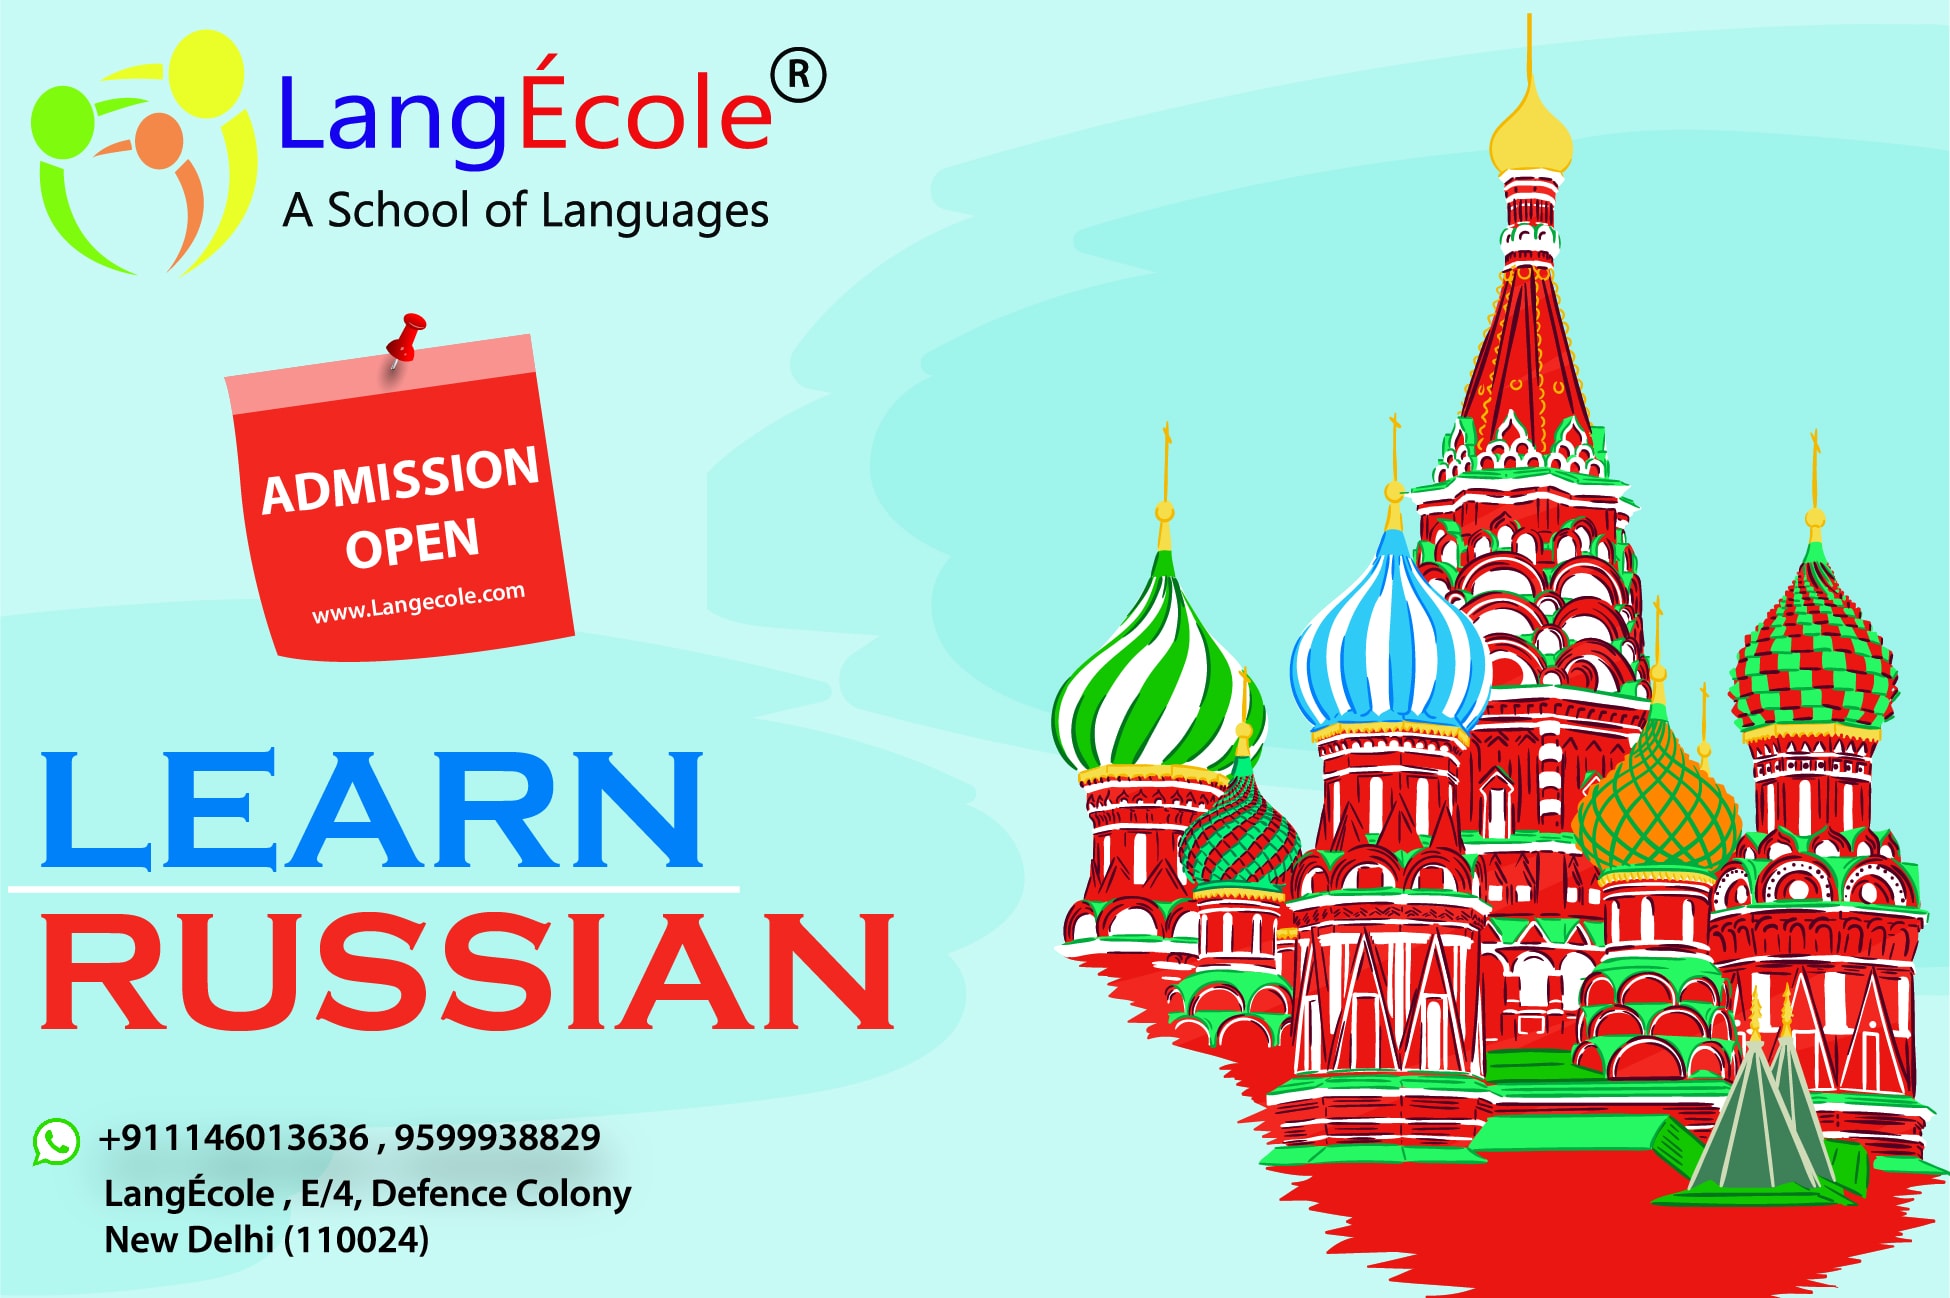 Russian Language Course offered at LangÉcole® School of Languages